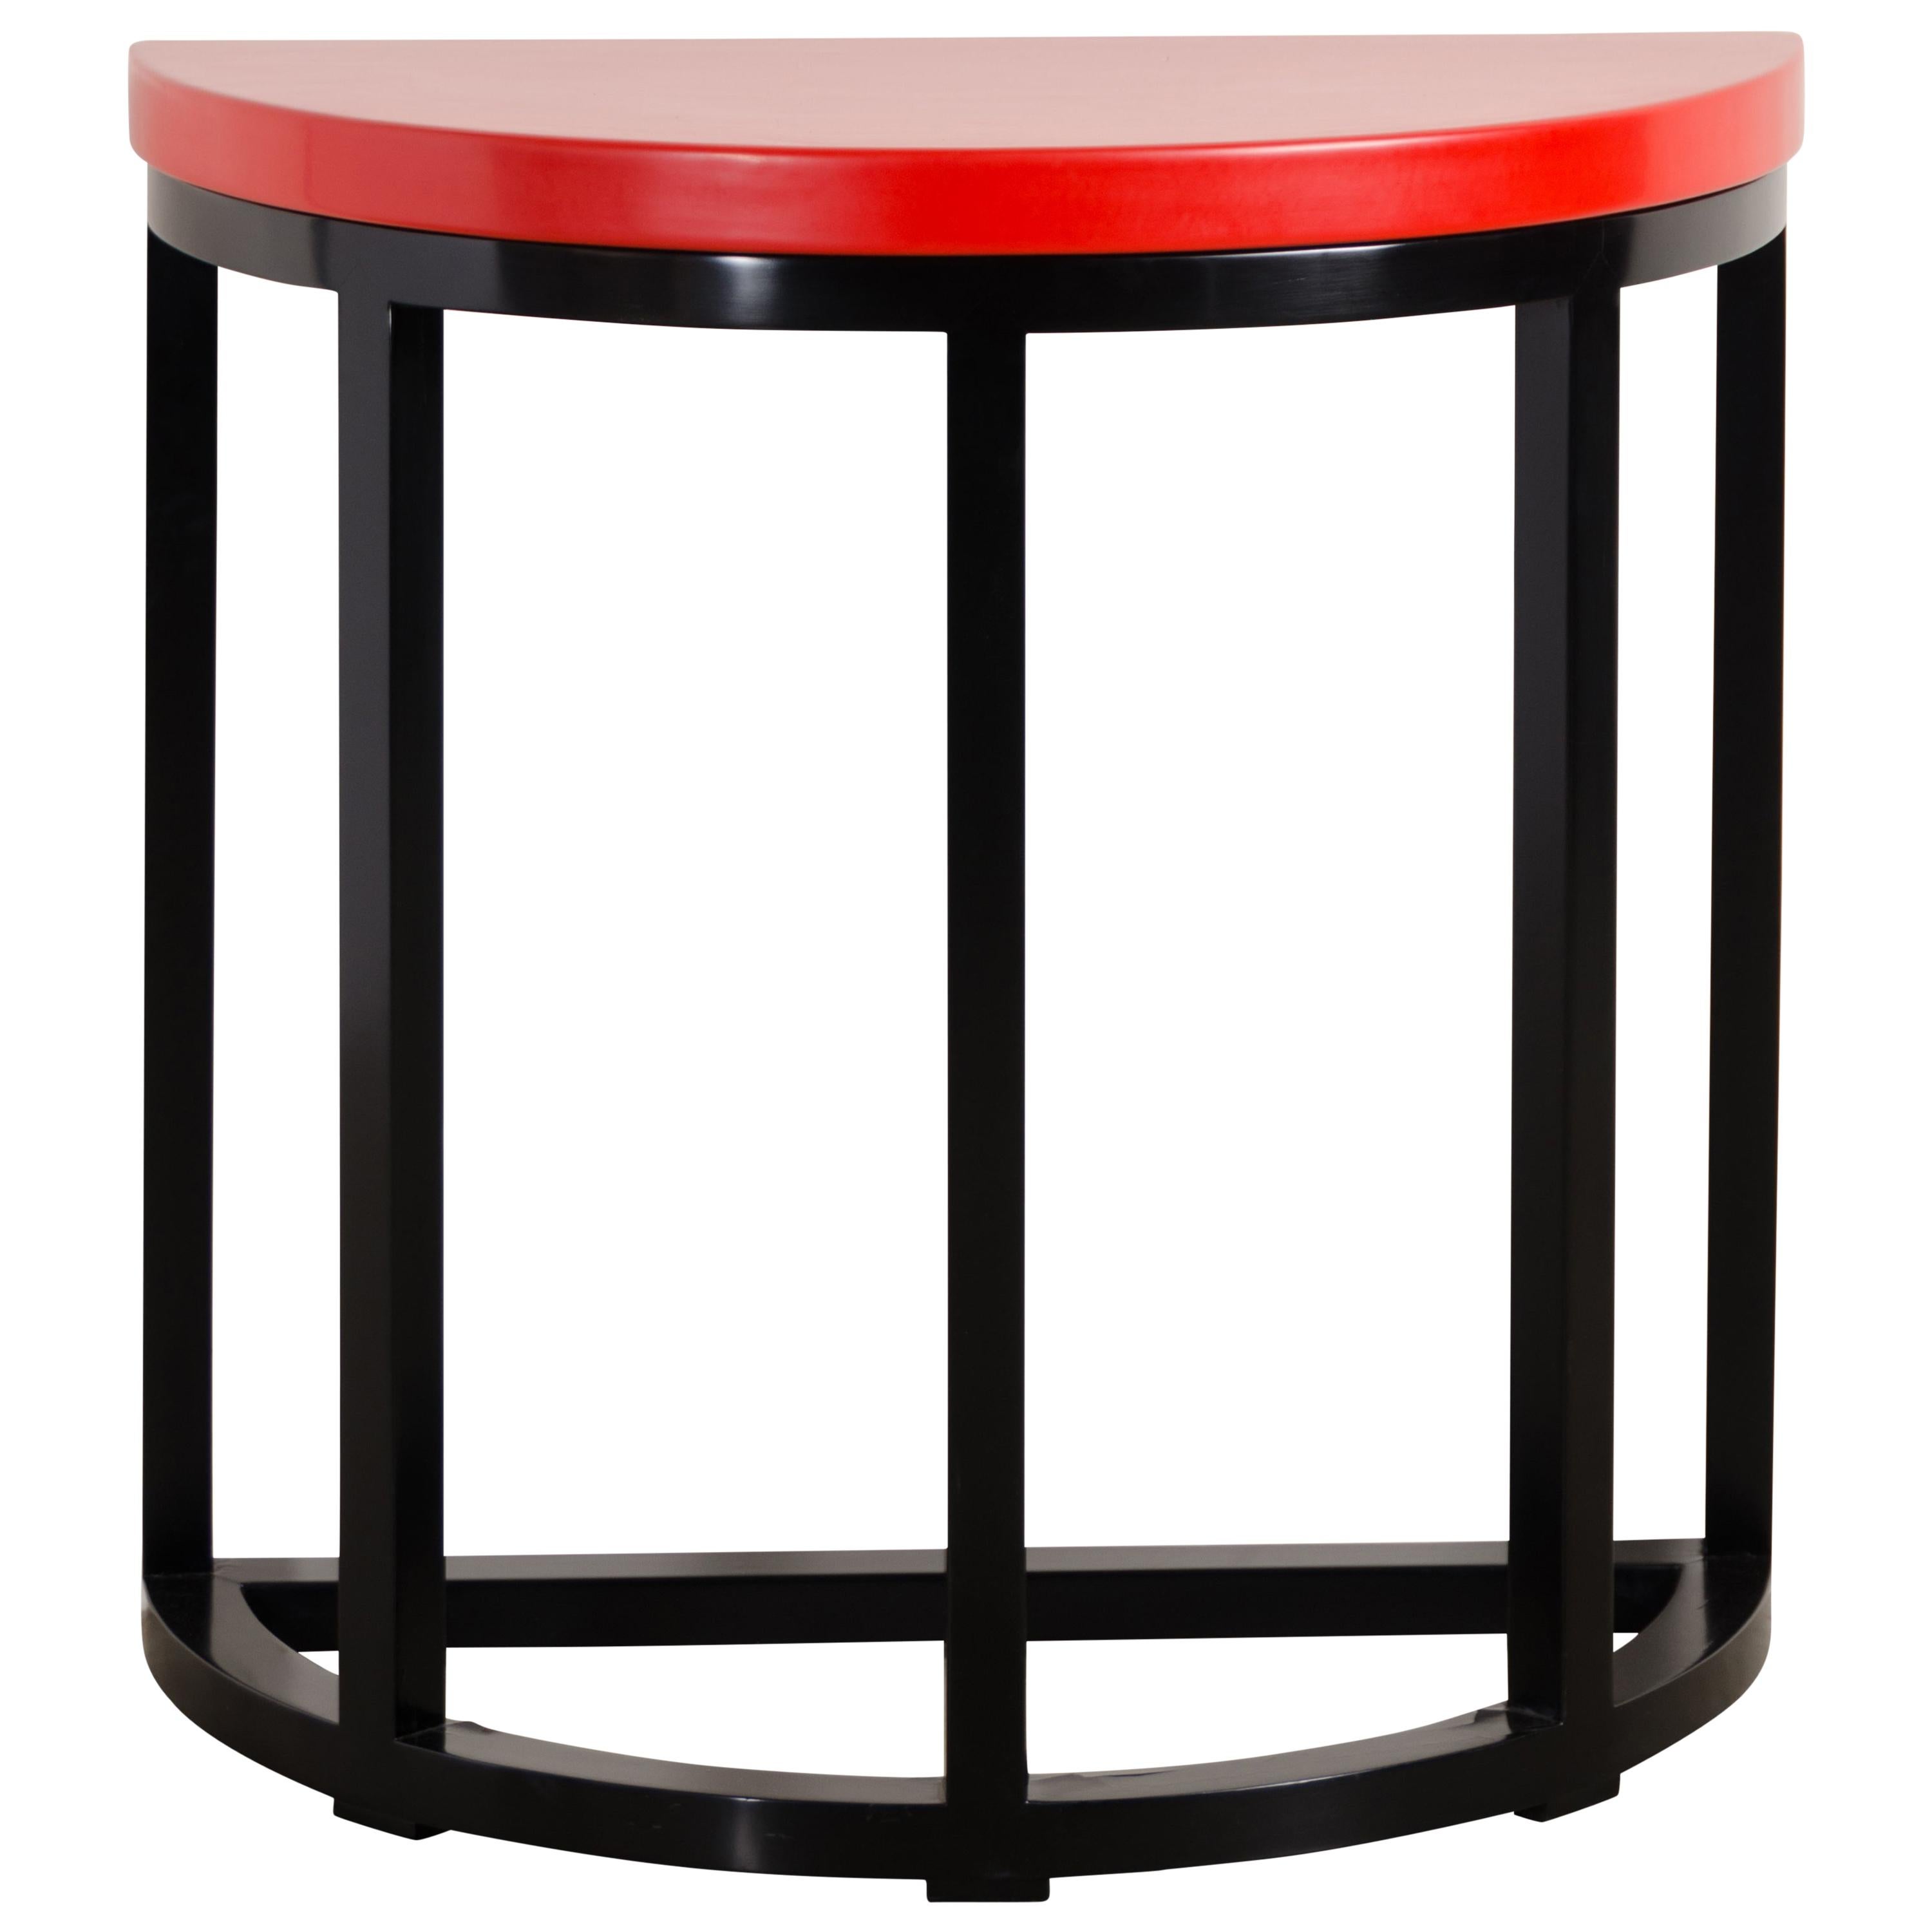 Half Round Table, Red Lacquer by Robert Kuo, Handmade, Limited Edition